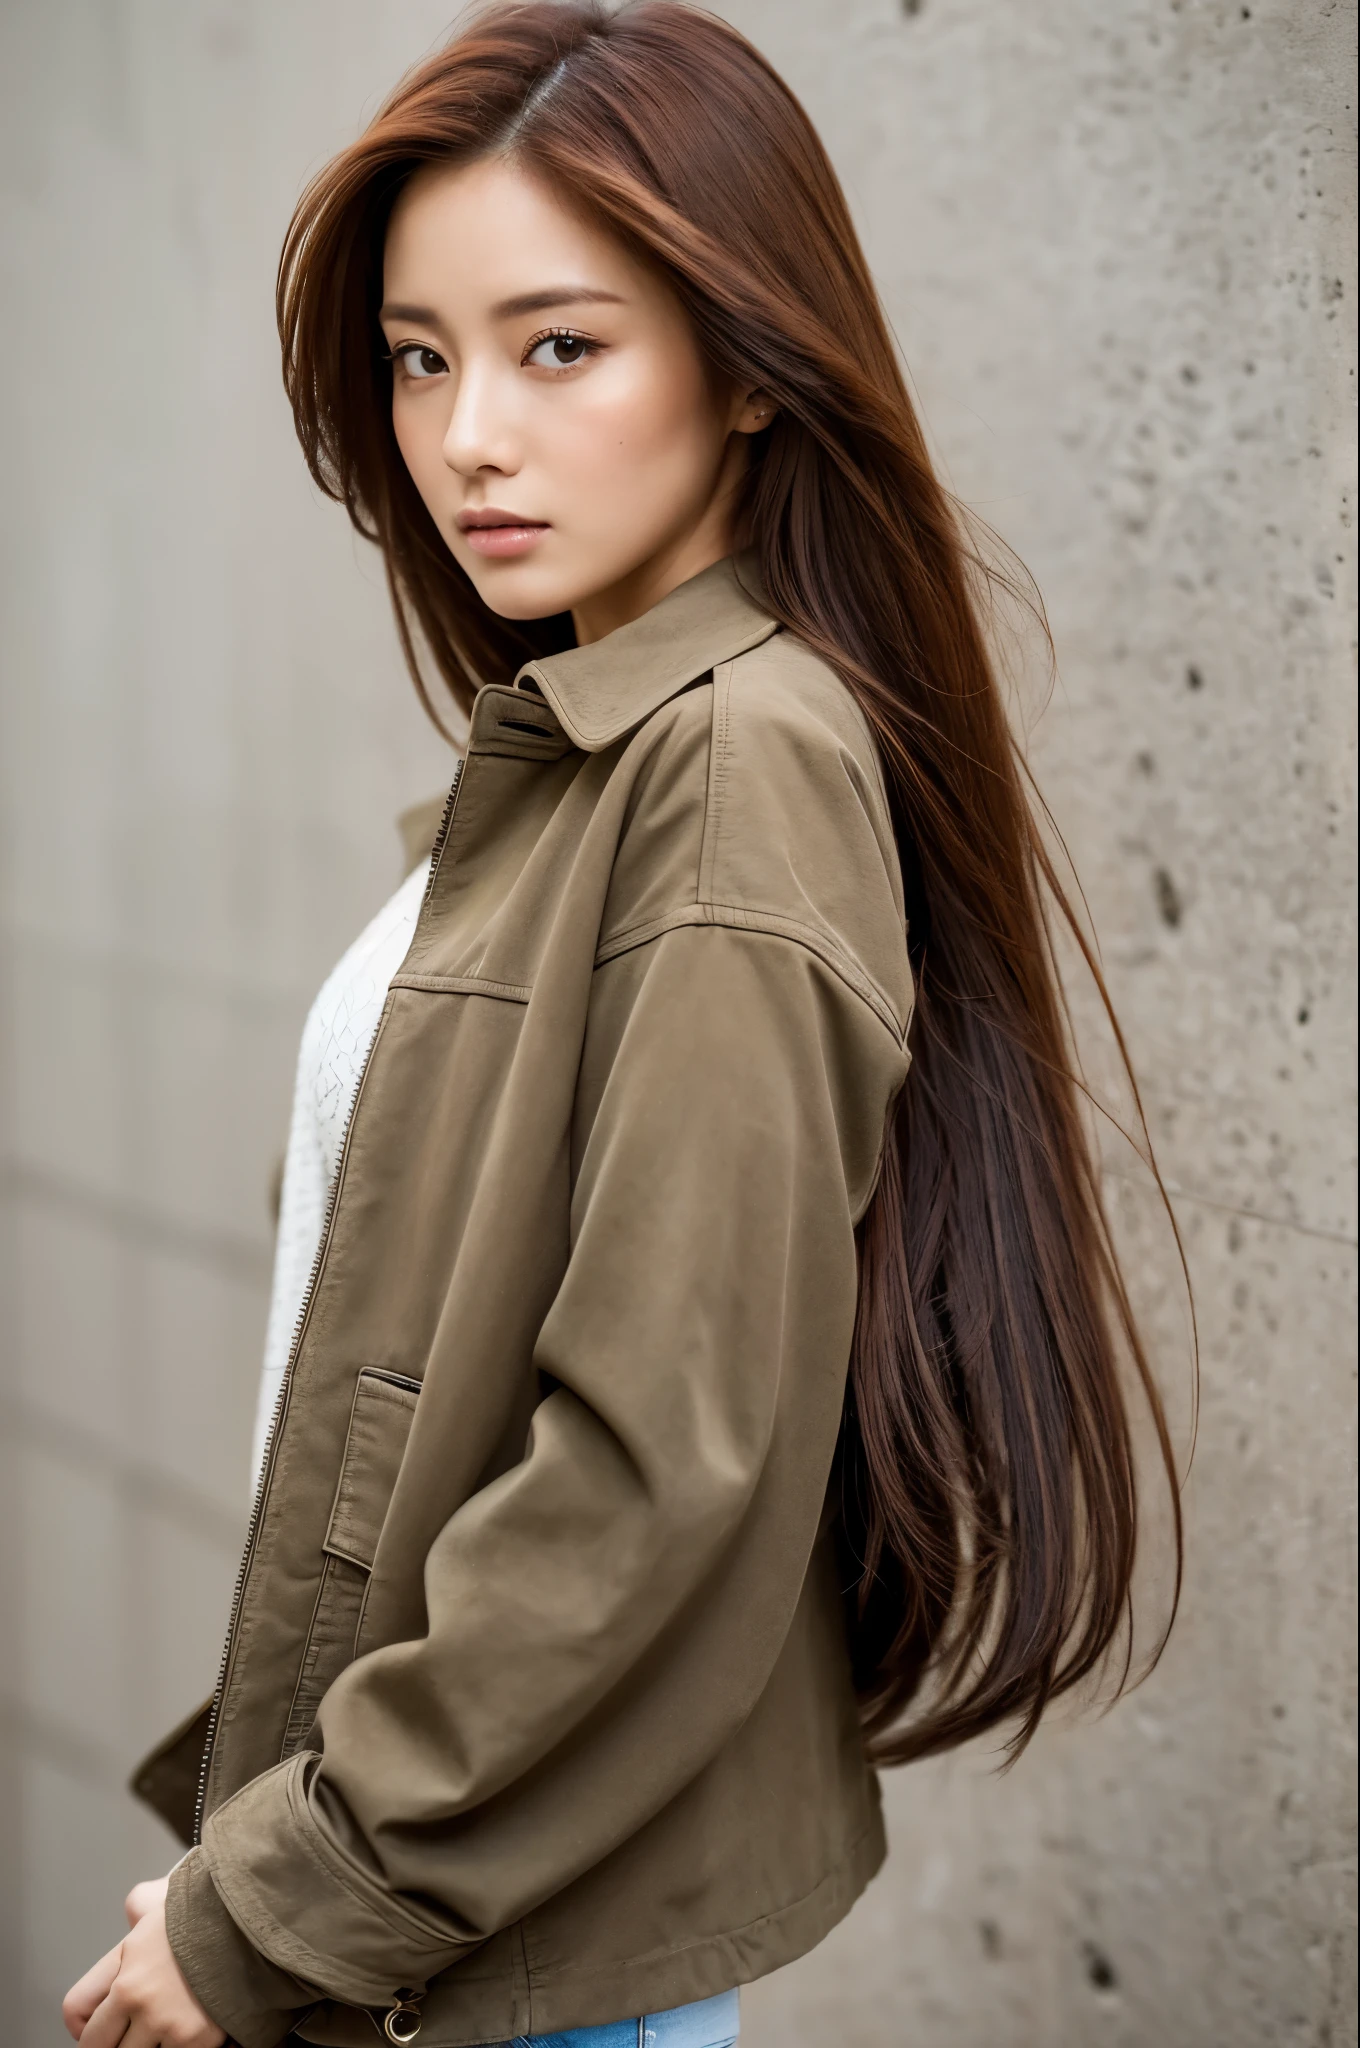 top quality, 1 beautiful woman, 28 years old, s, 35mm lens, f/1, Cowboy shot, Concrete background、Tile background、medium straight hair、riders jacket　shirt、light reddish brown hair、from side、realistic eyes,spread legs